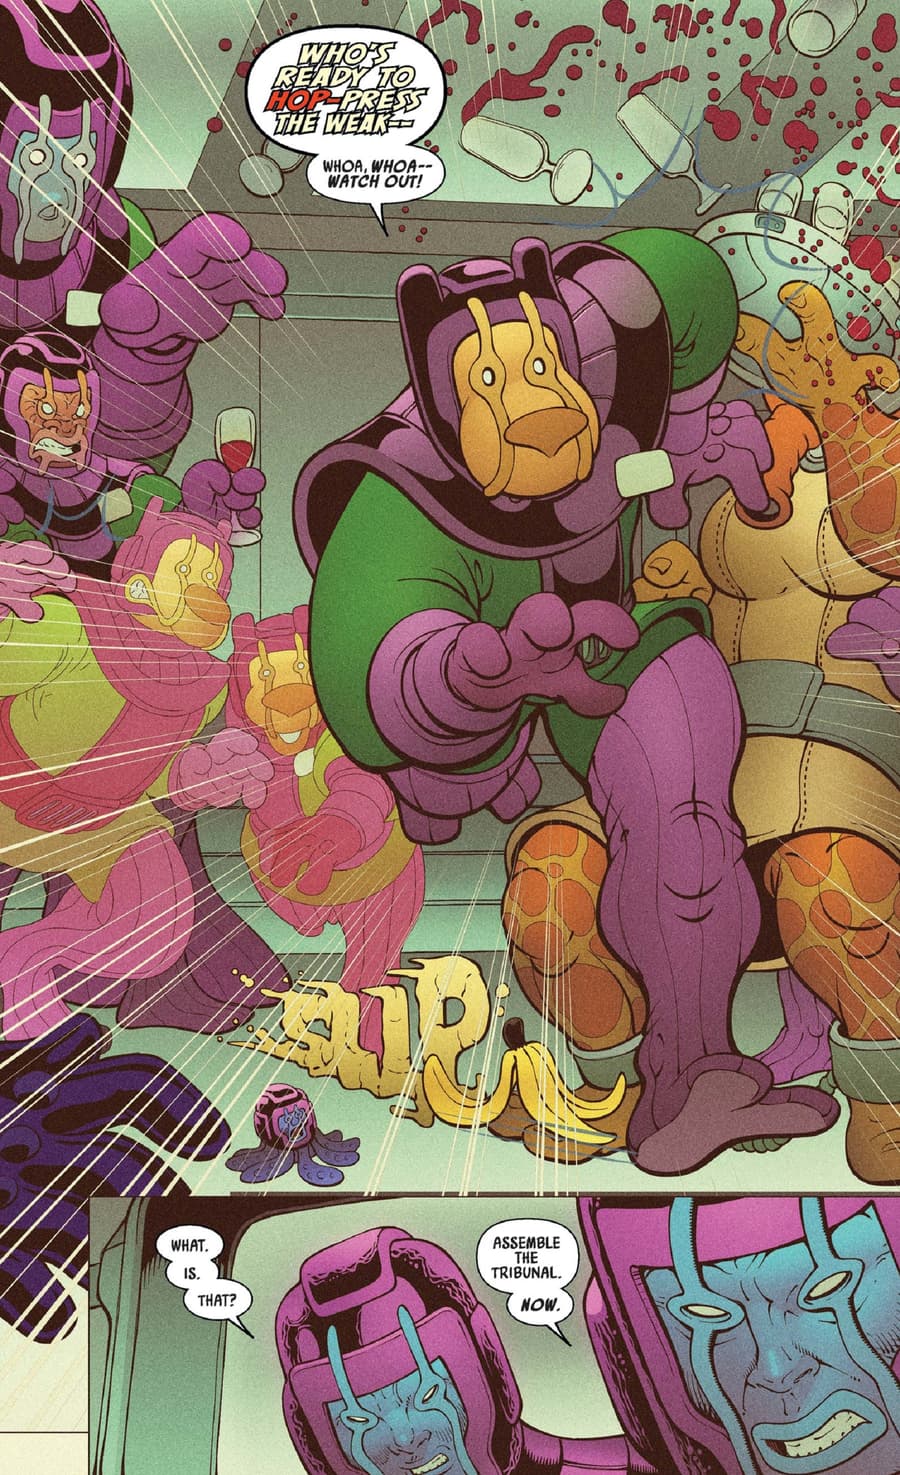 An affront to all Kangs in SPIDER-HAM (2019) #4.